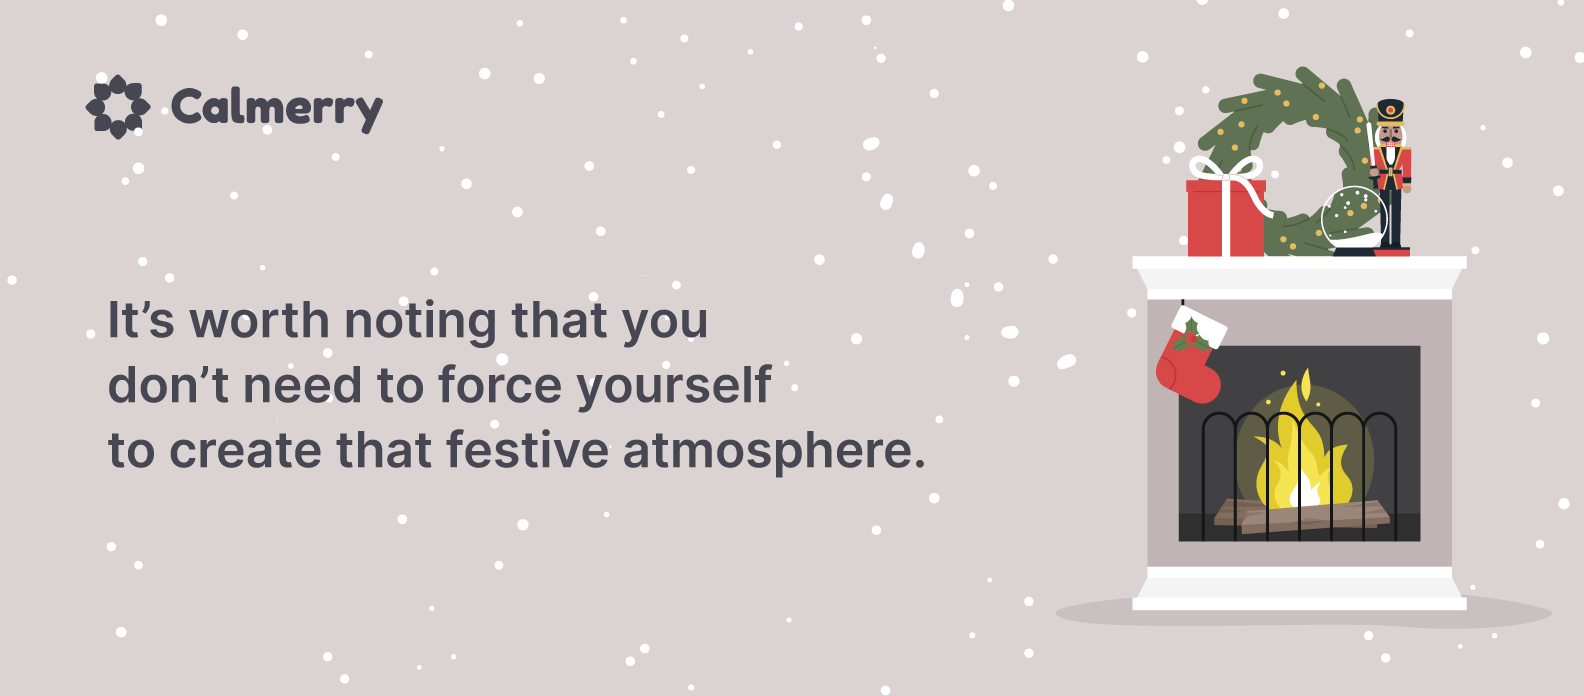 You don't have to create that festive atmosphere if you don't feel like it 